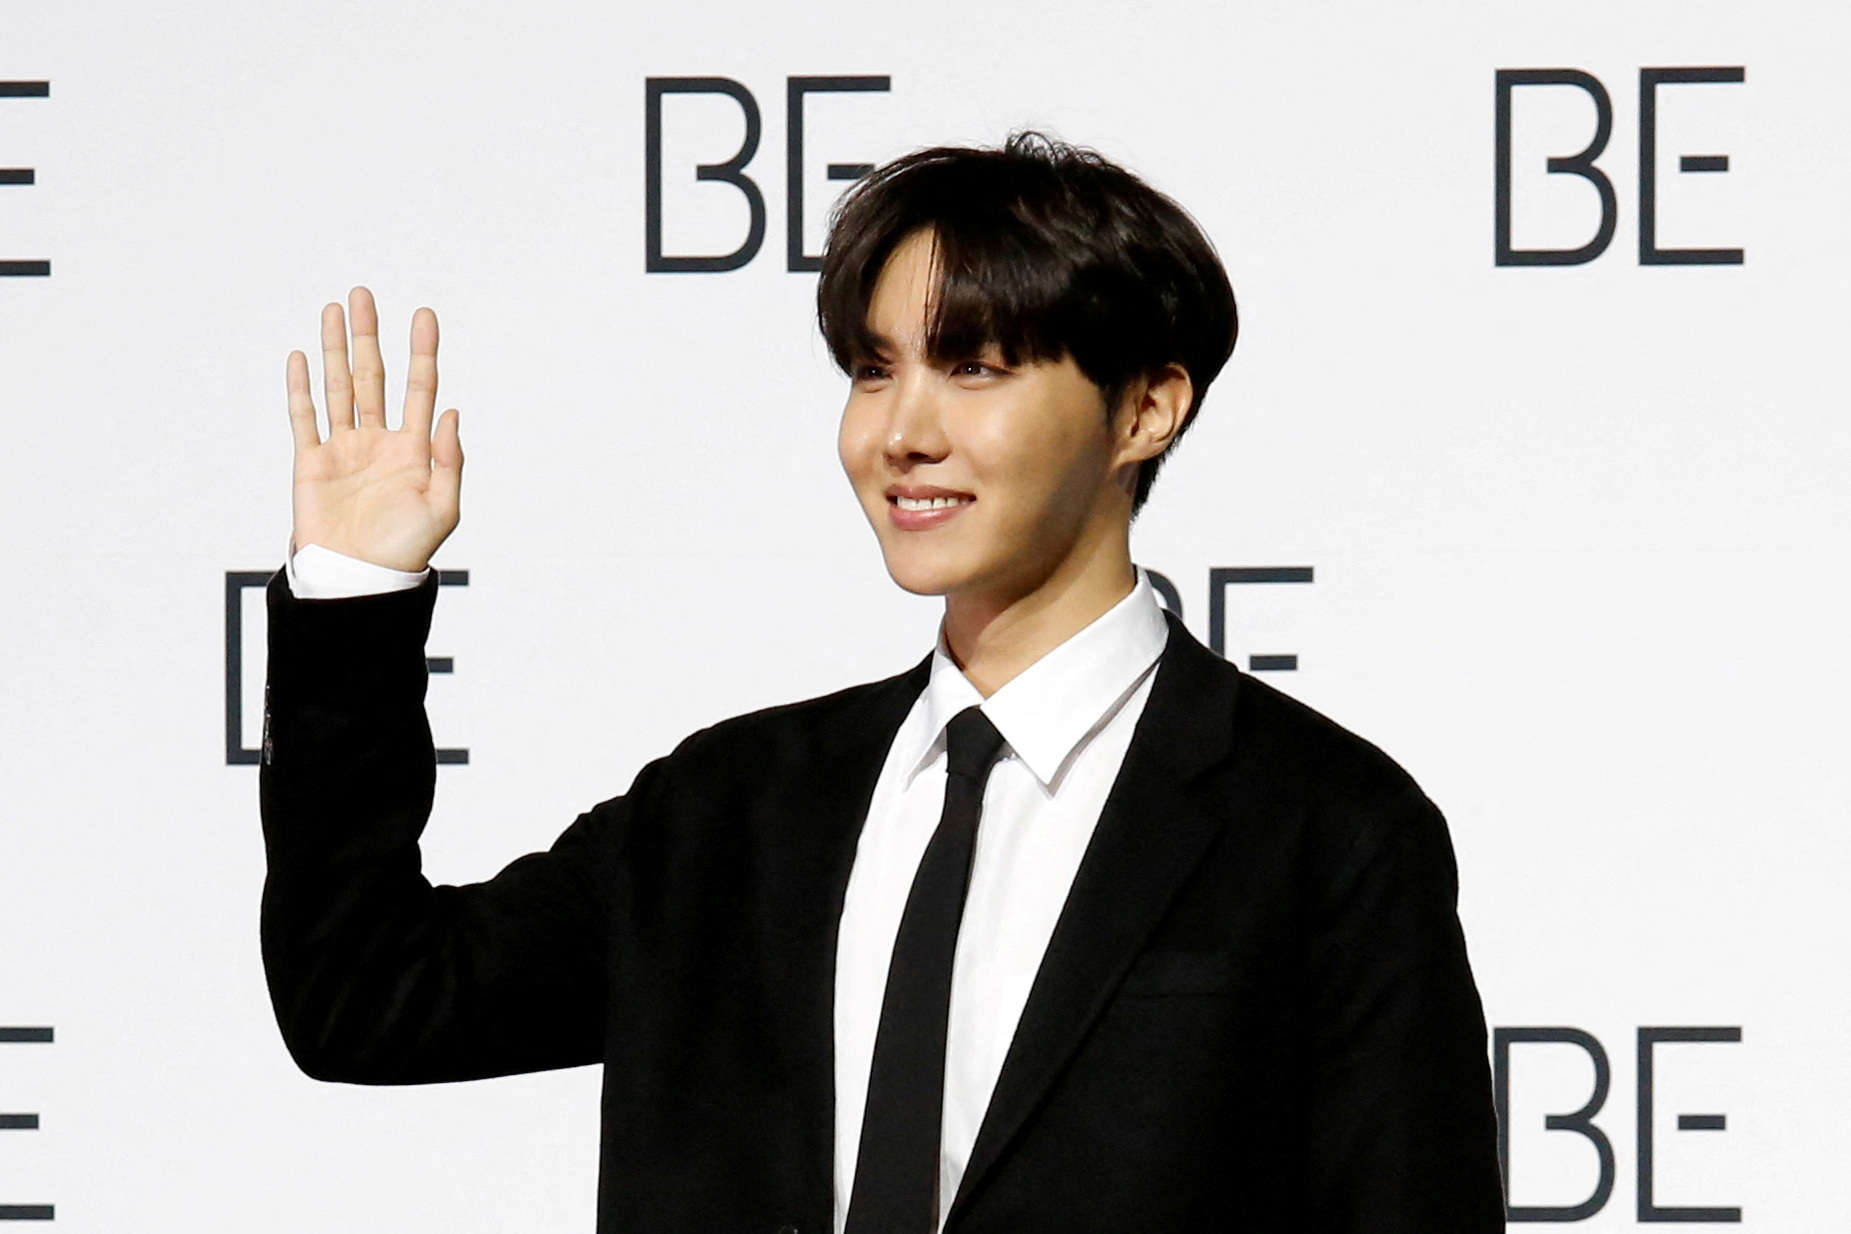 bts jhope military service: BTS j-hope confirms his military